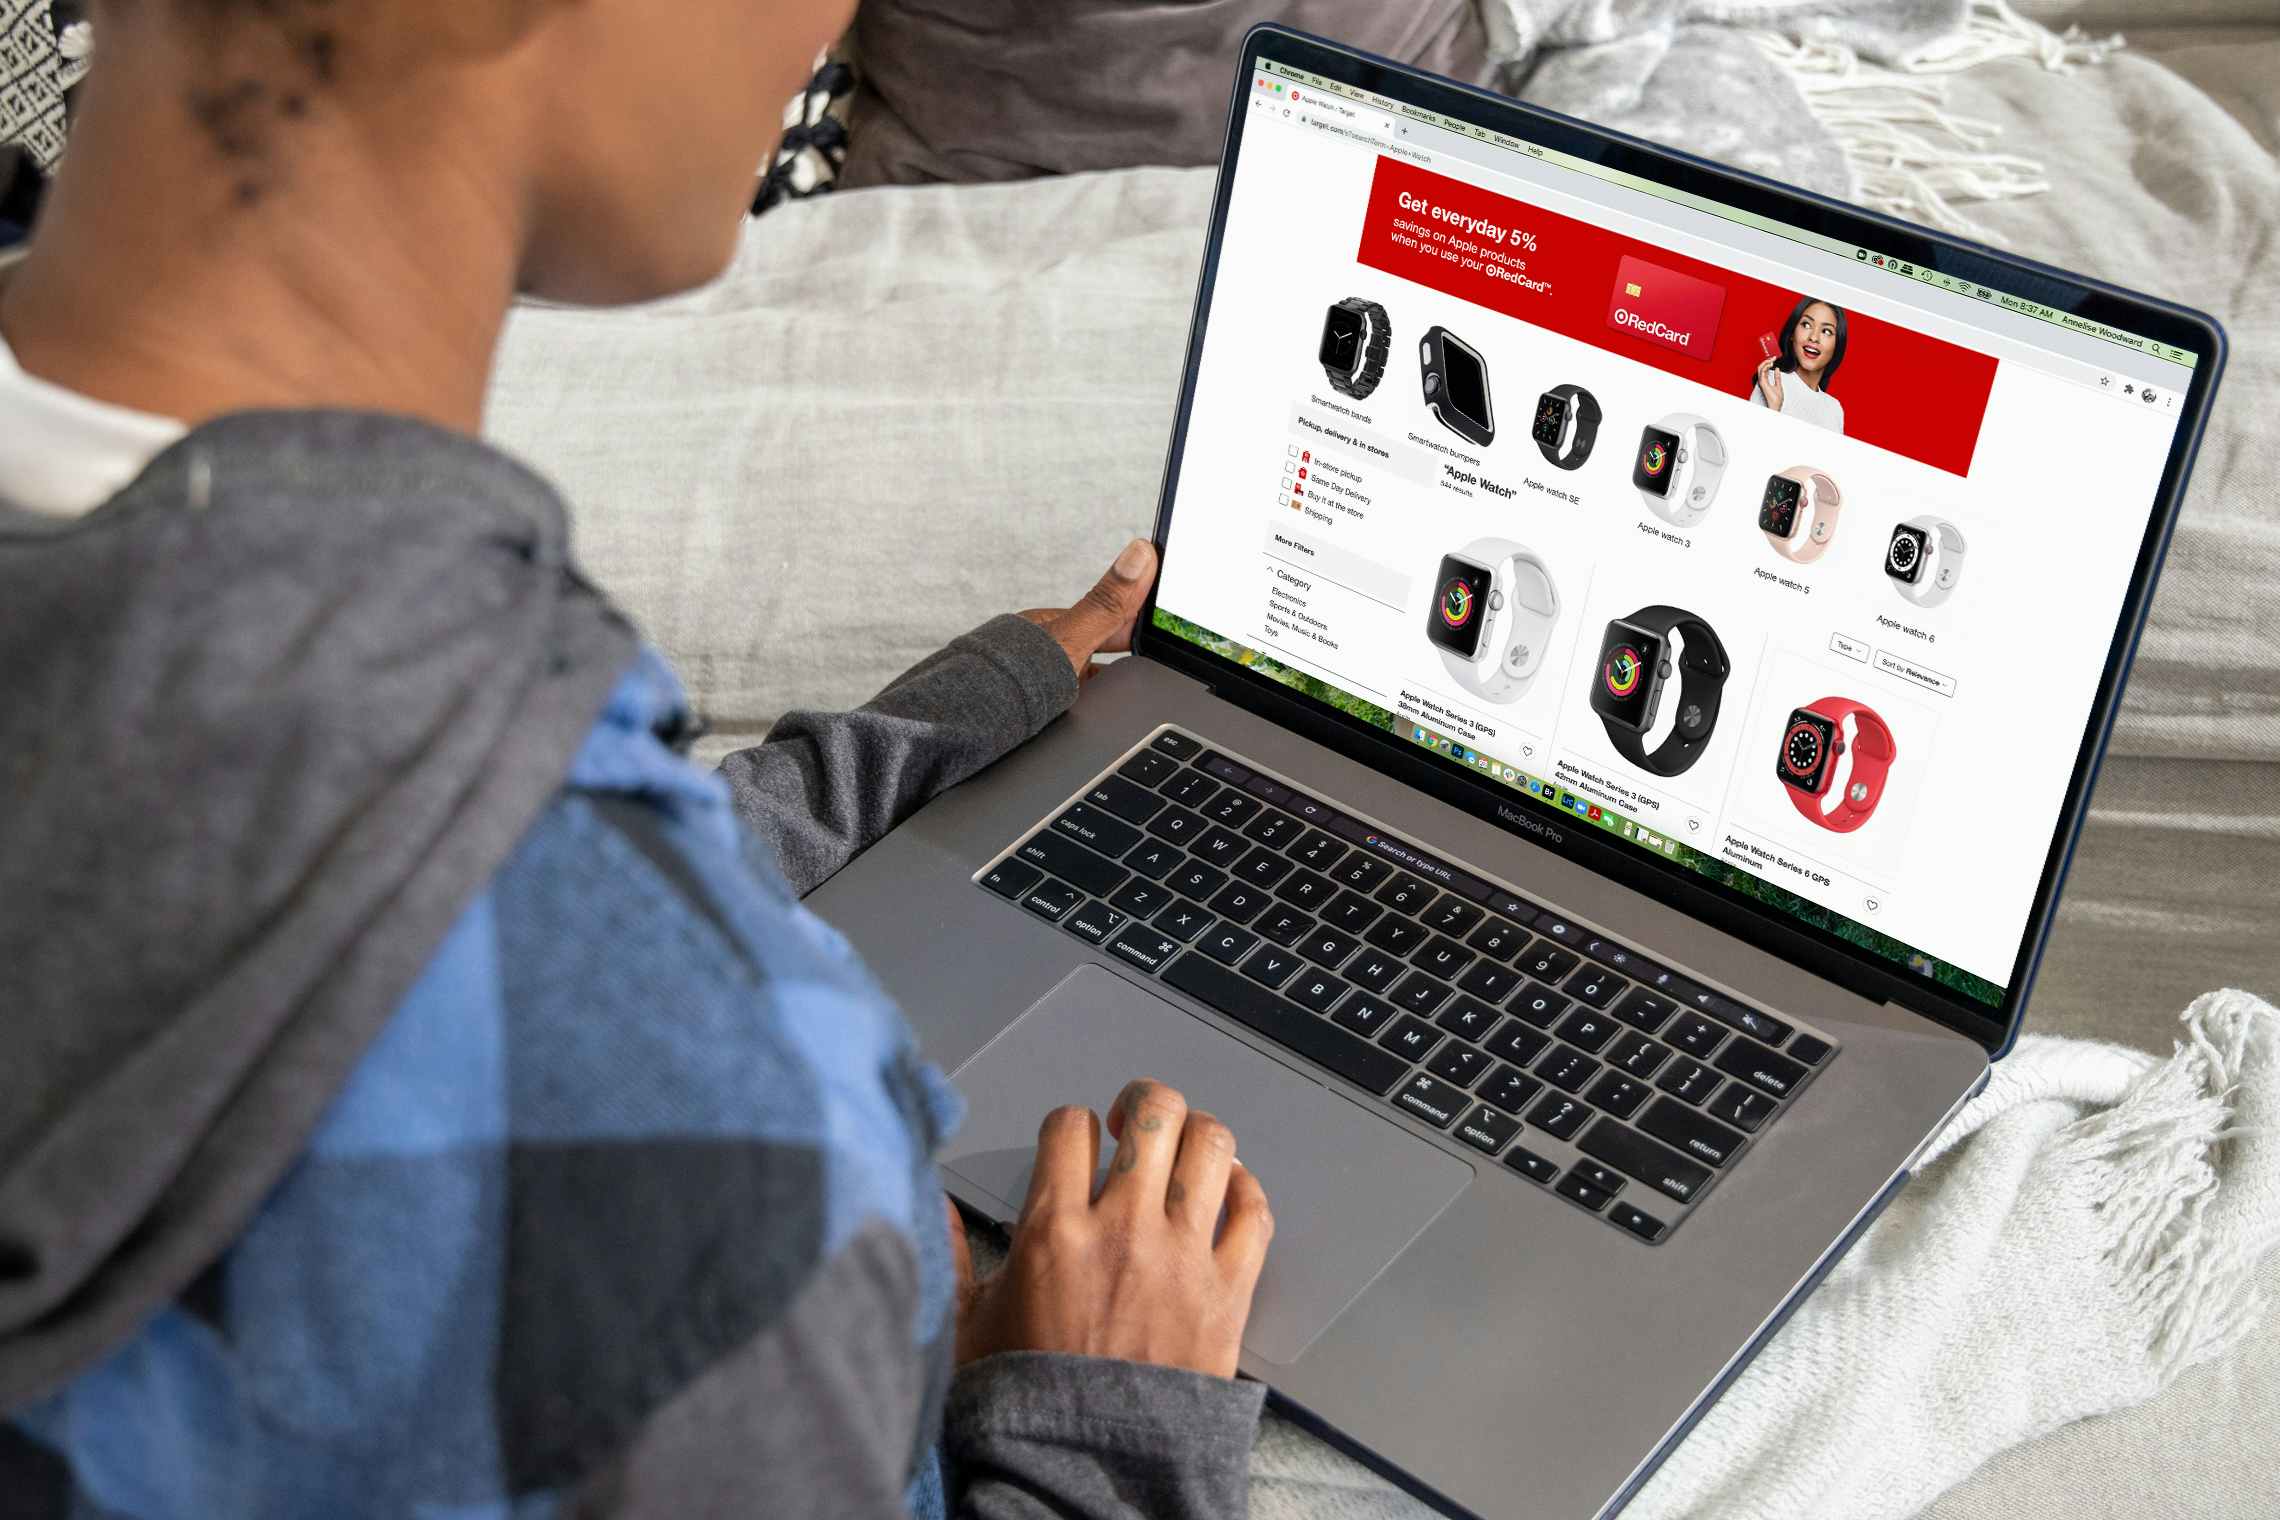 A person sitting on a couch, using a laptop that is displaying a page of smart watches on the Target website.